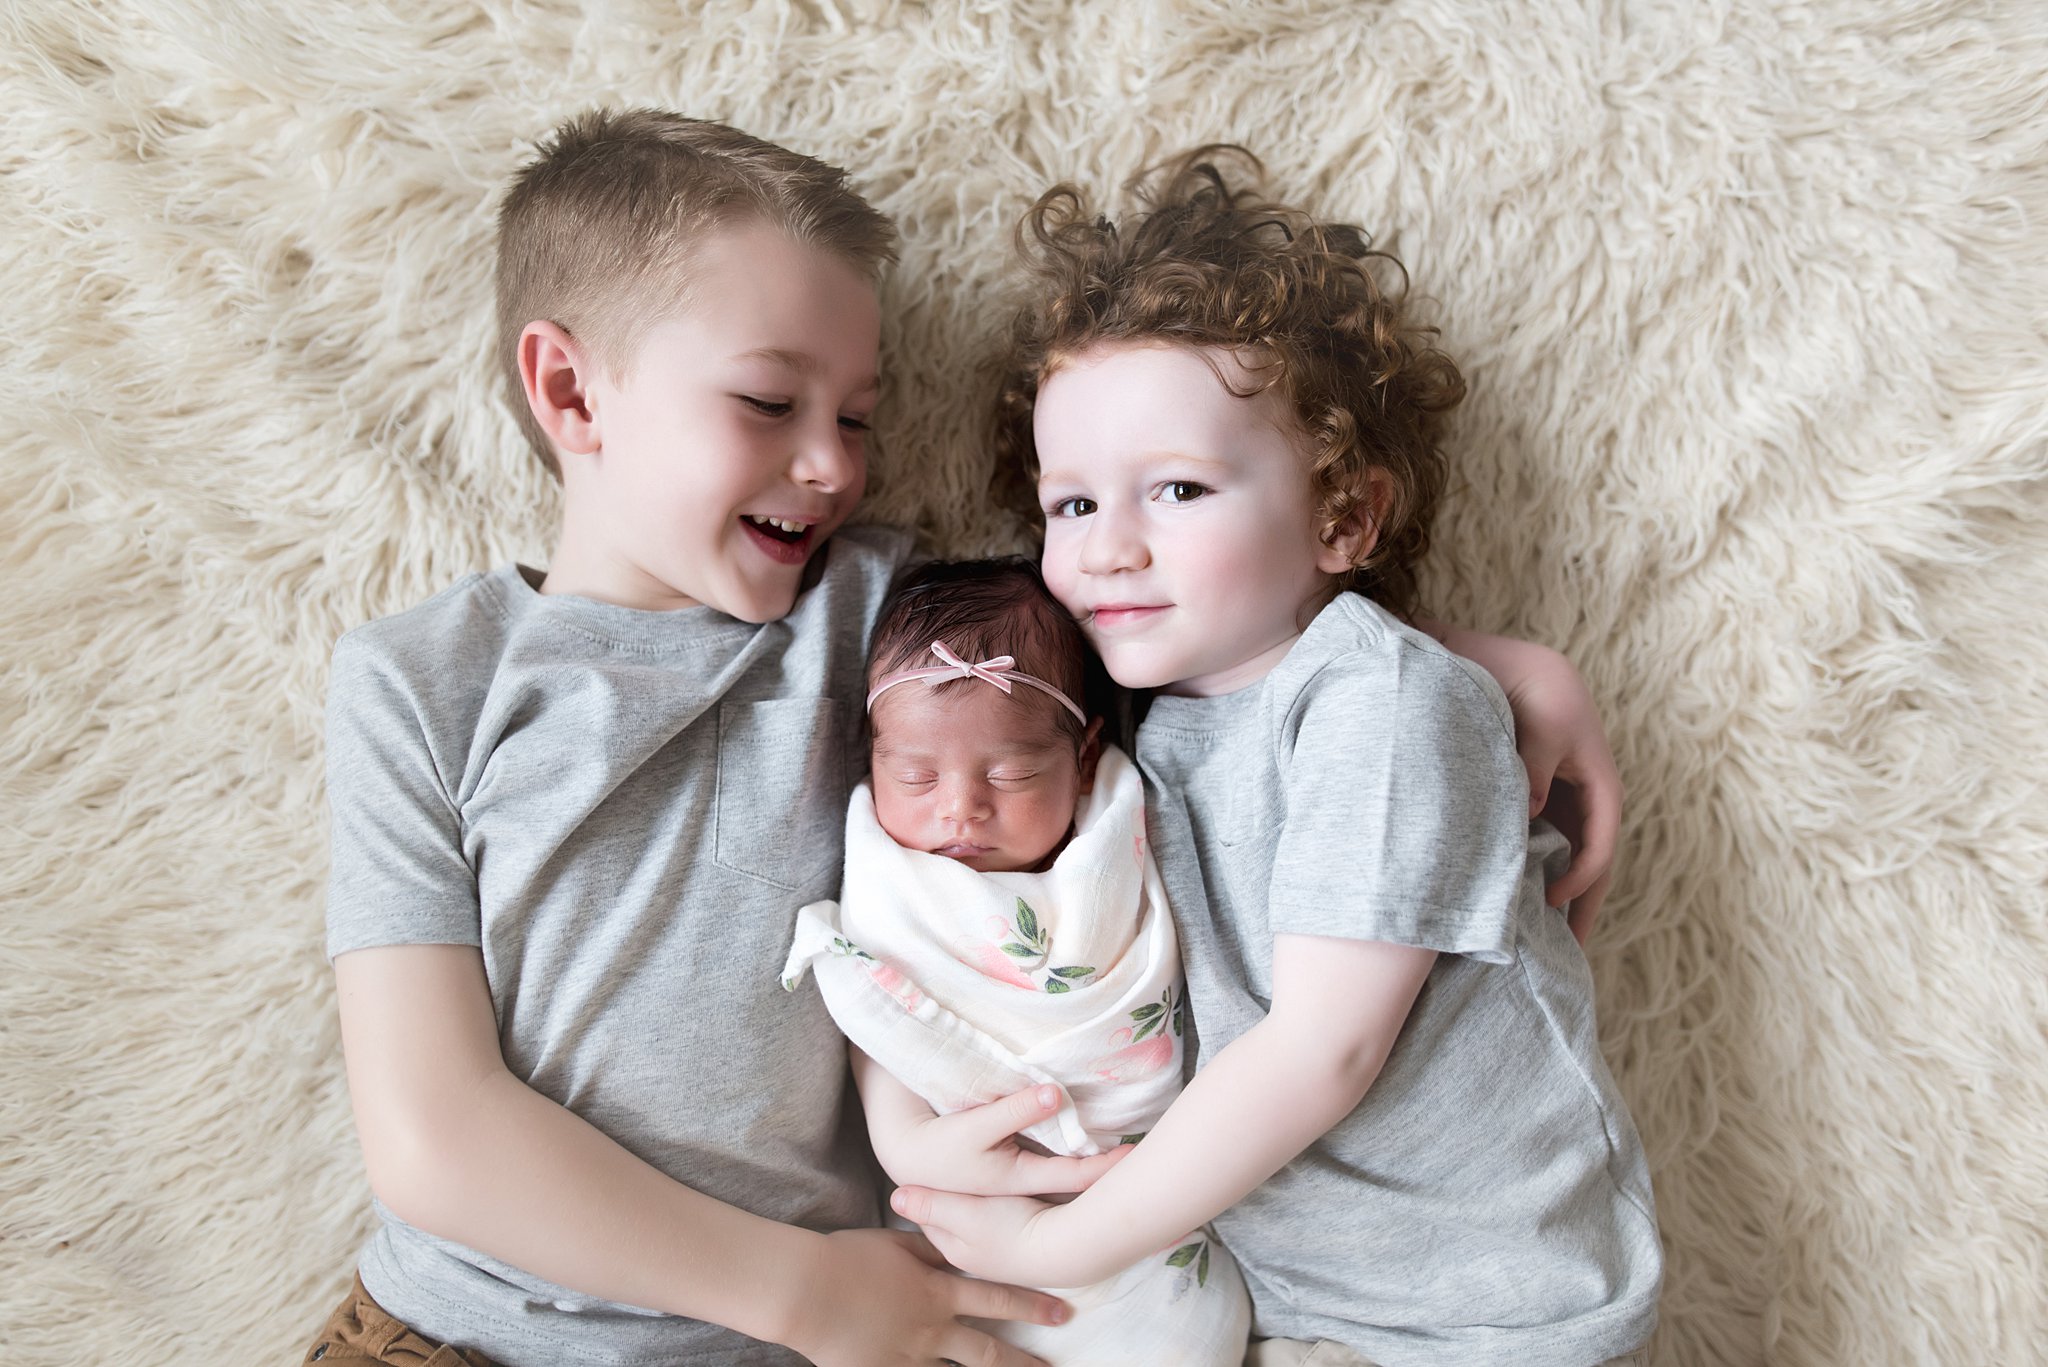  brothers lay together with their new baby sister between them 